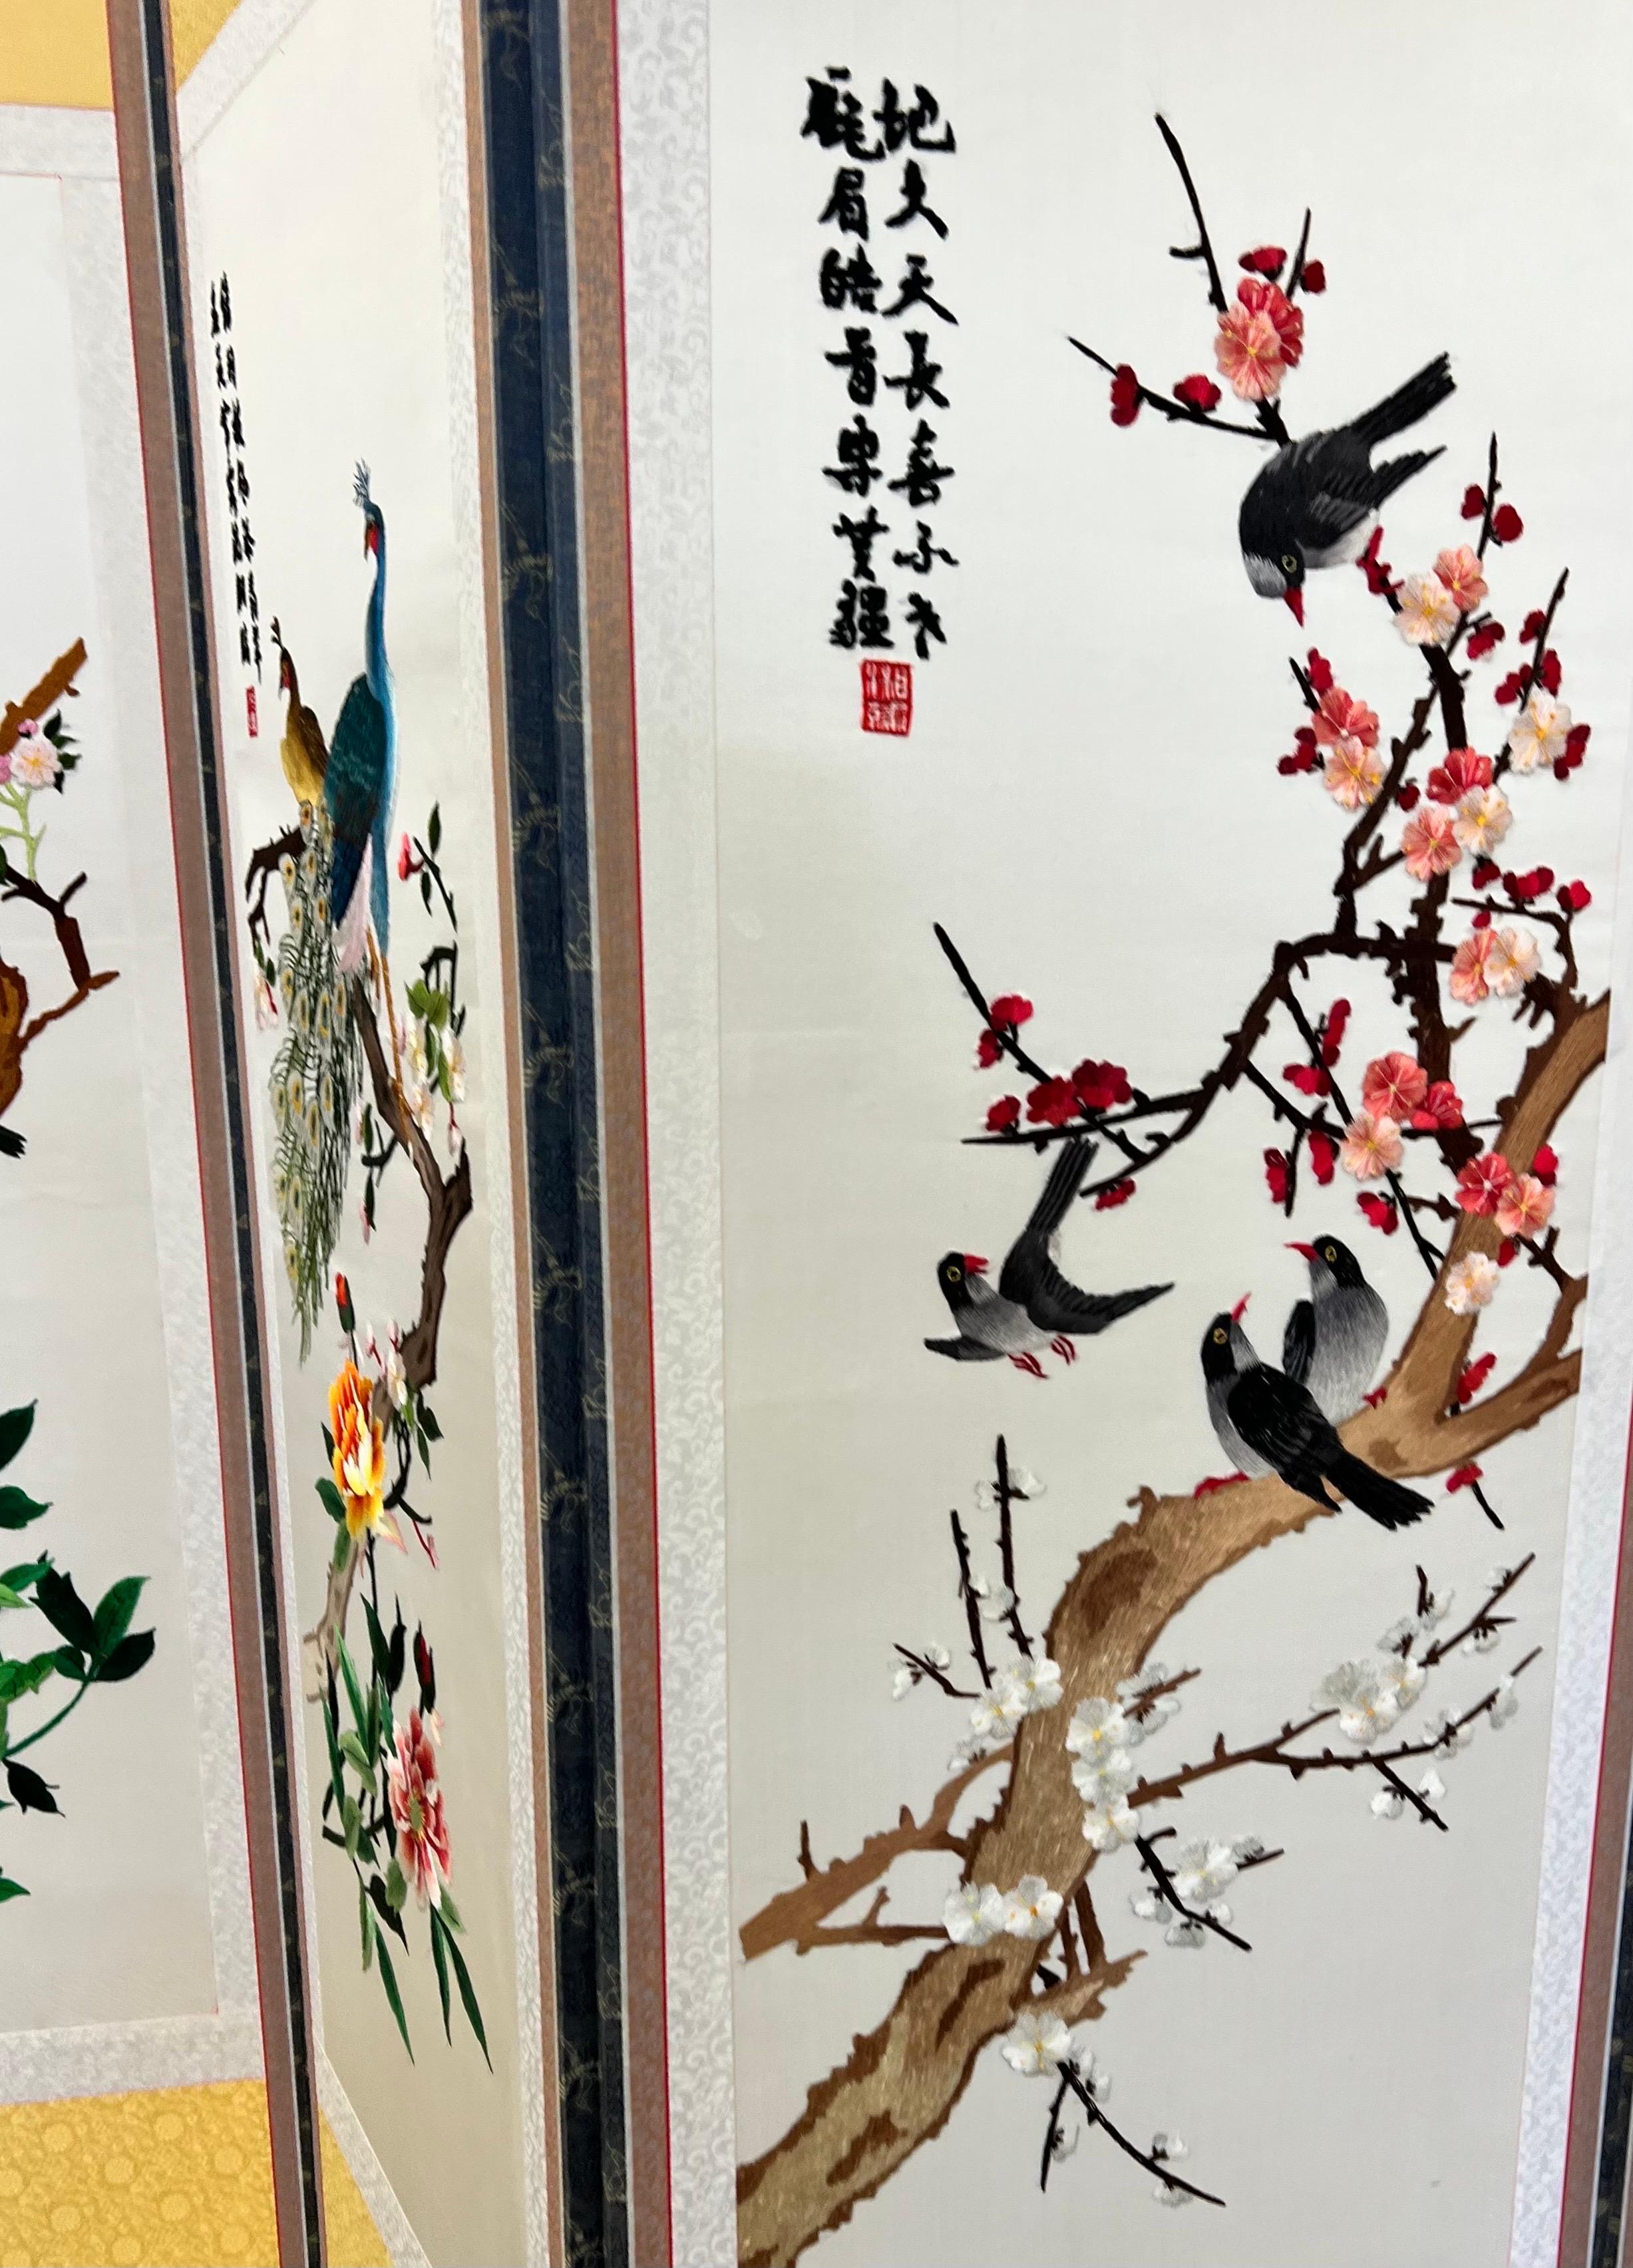 Mid-20th Century Exquisite Chinese Embroidered Silk 8 Panel Room Divider Screen of Birds, Flowers